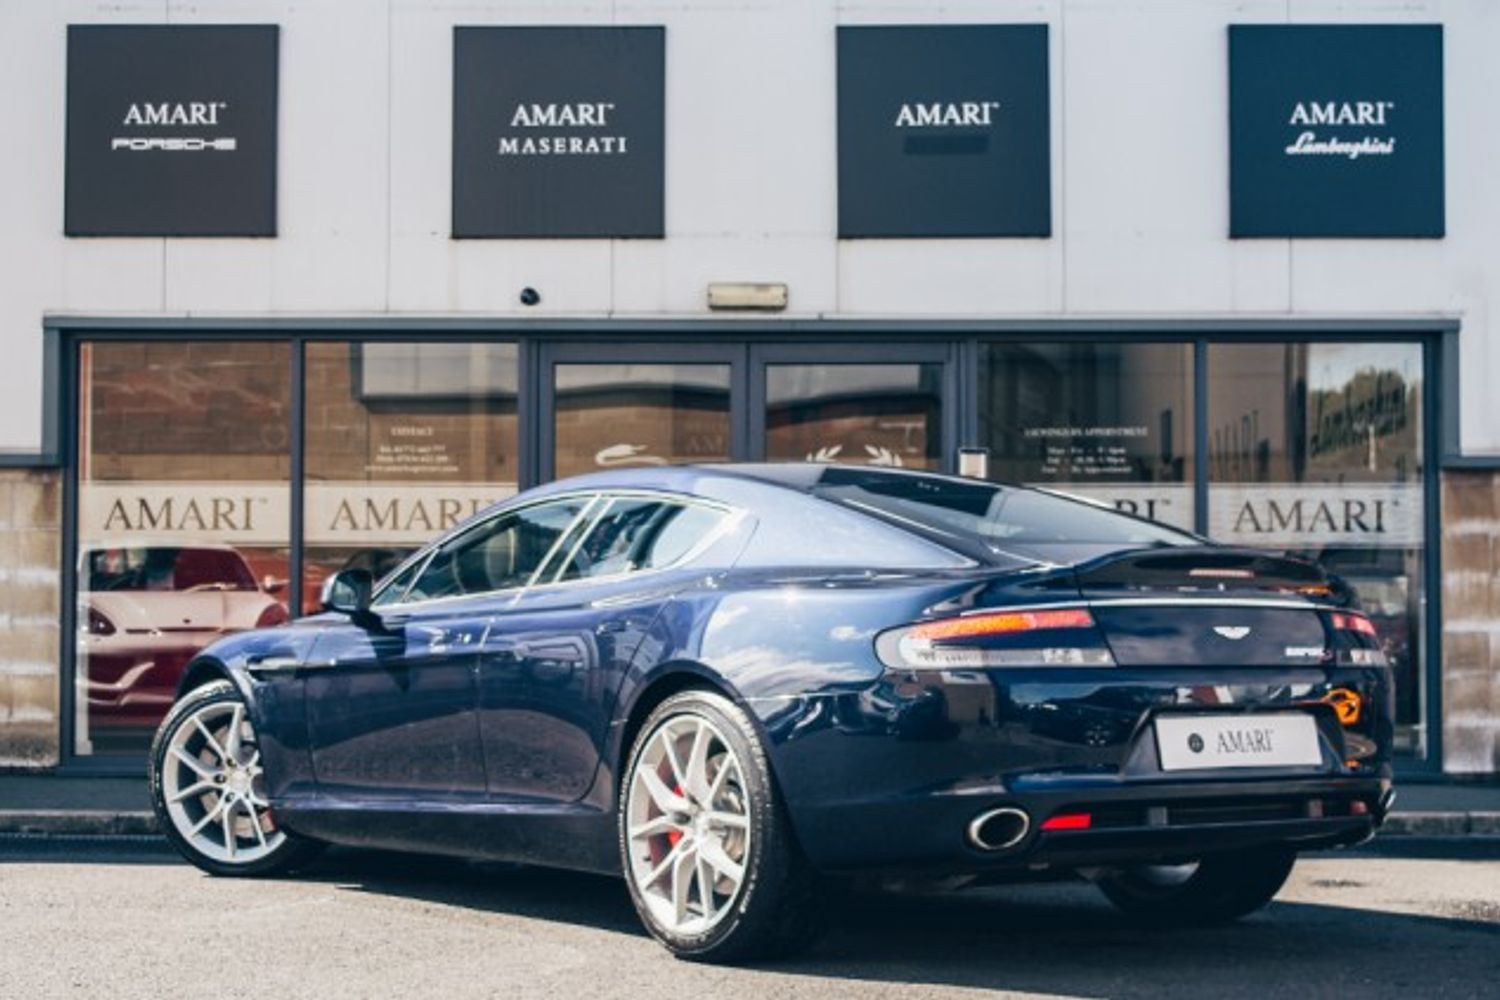 ASTON MARTIN RAPIDE Touchtronic 3 5.9 S V12 5DR Automatic